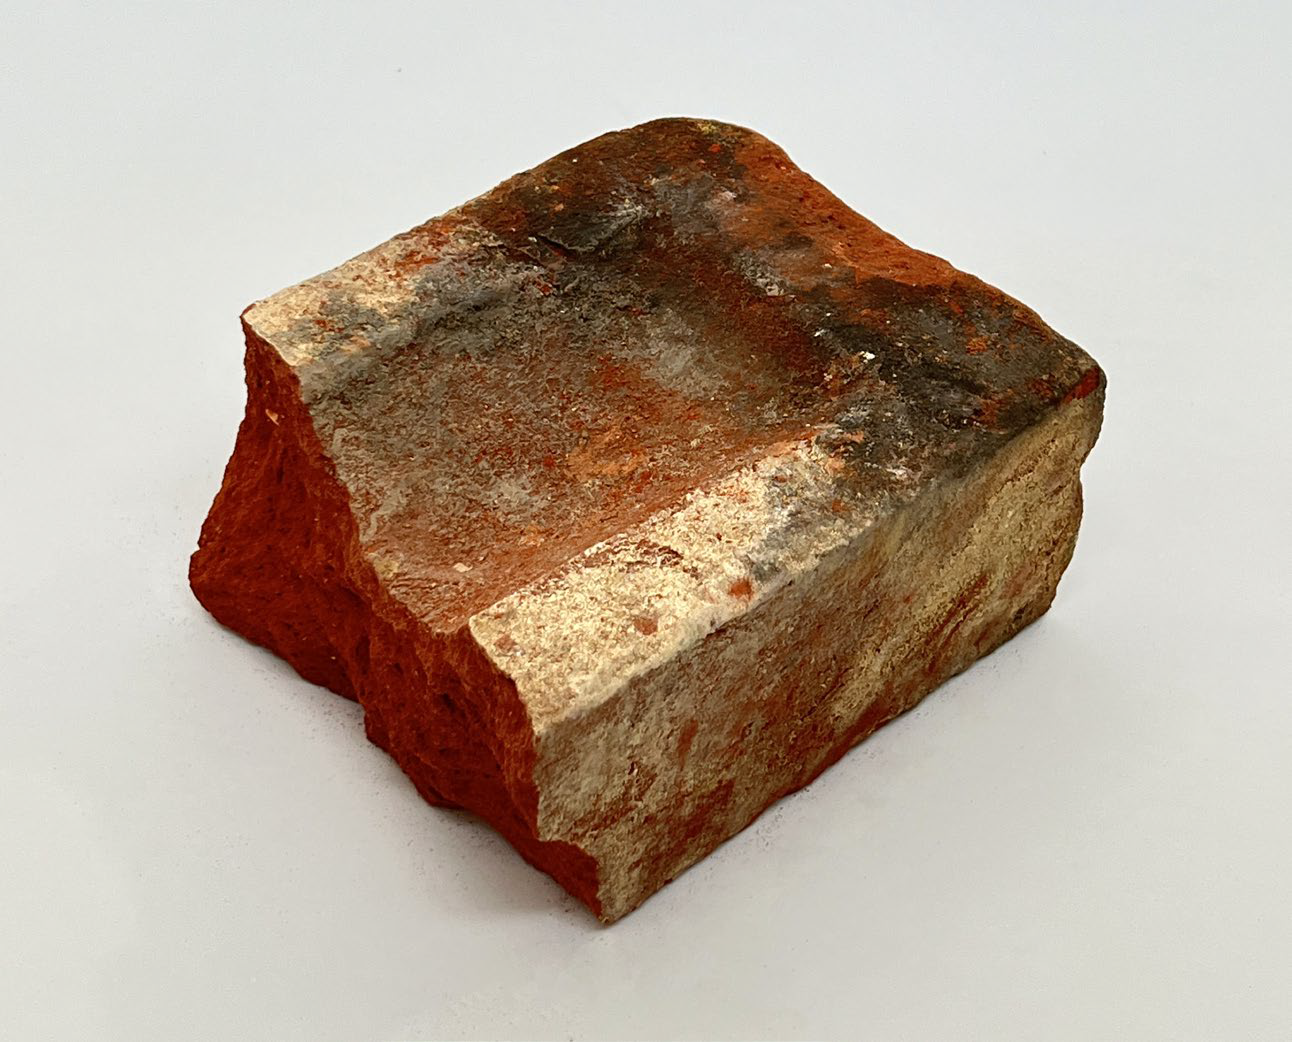 Red London brick from a demolished building in Wimbledon, selected for our Red Brick set